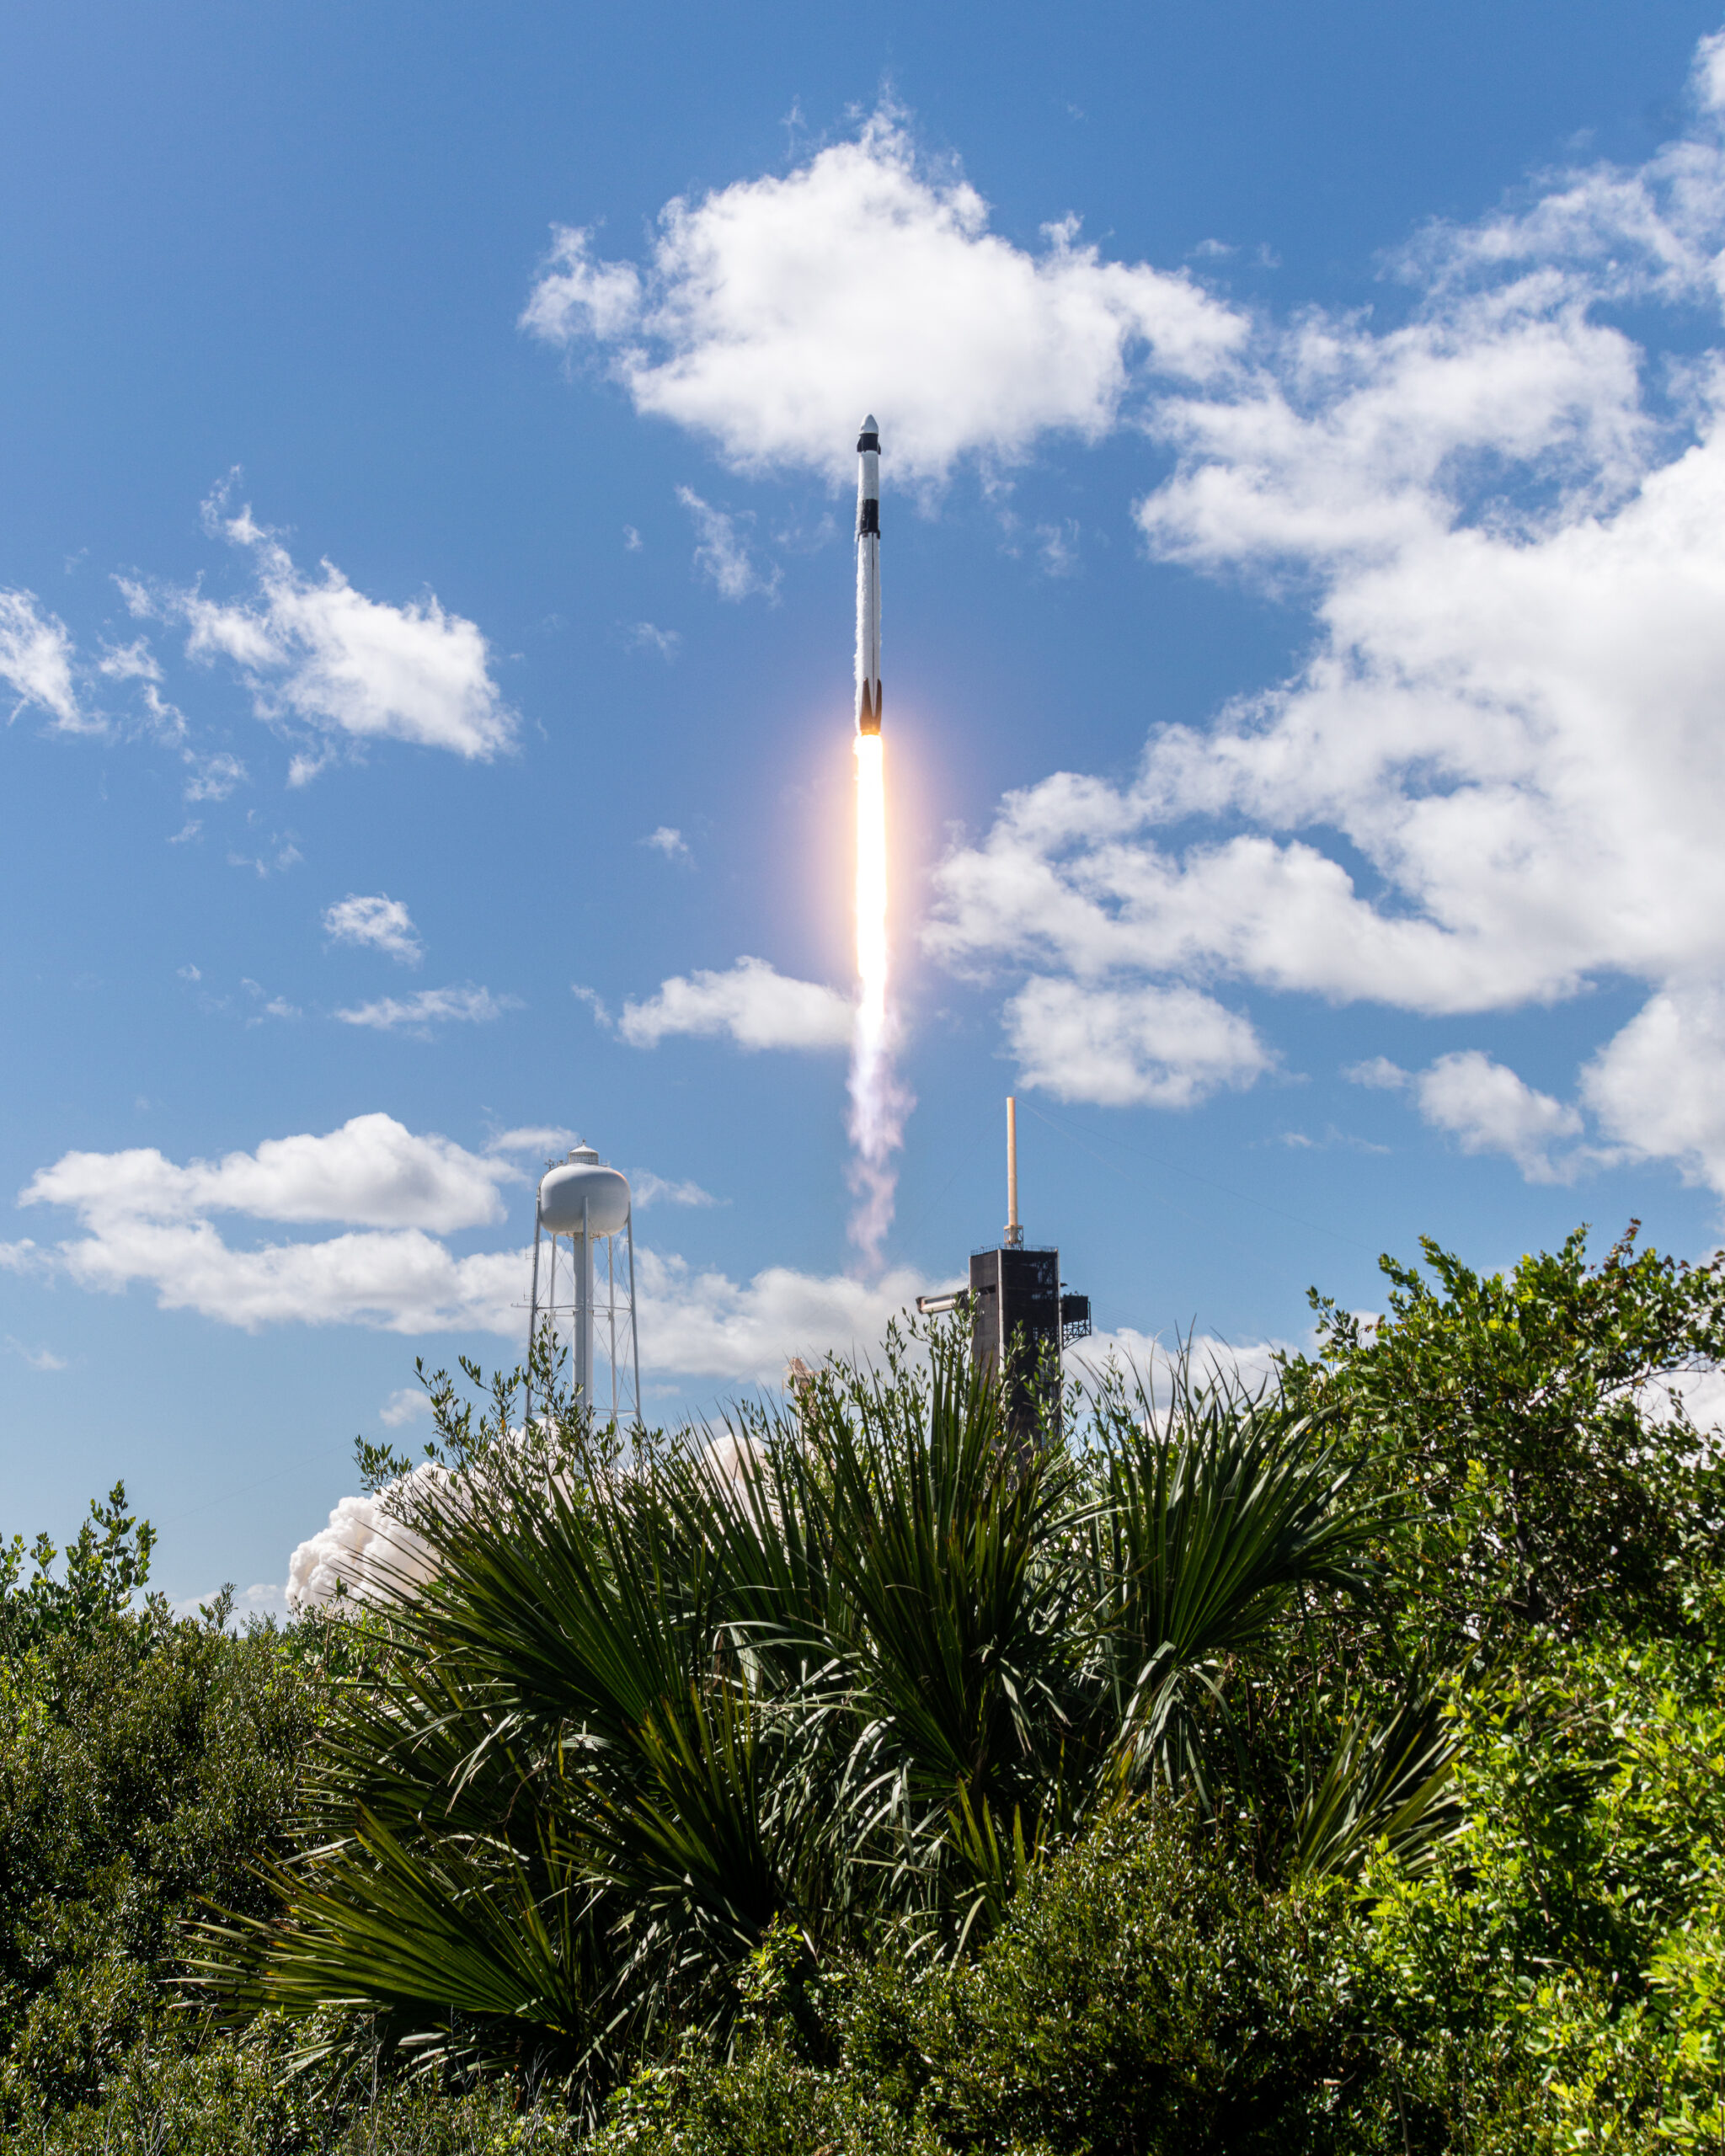 A remote camera view of Falcon 9 clearing the pad with some Florida foliage in the foreground